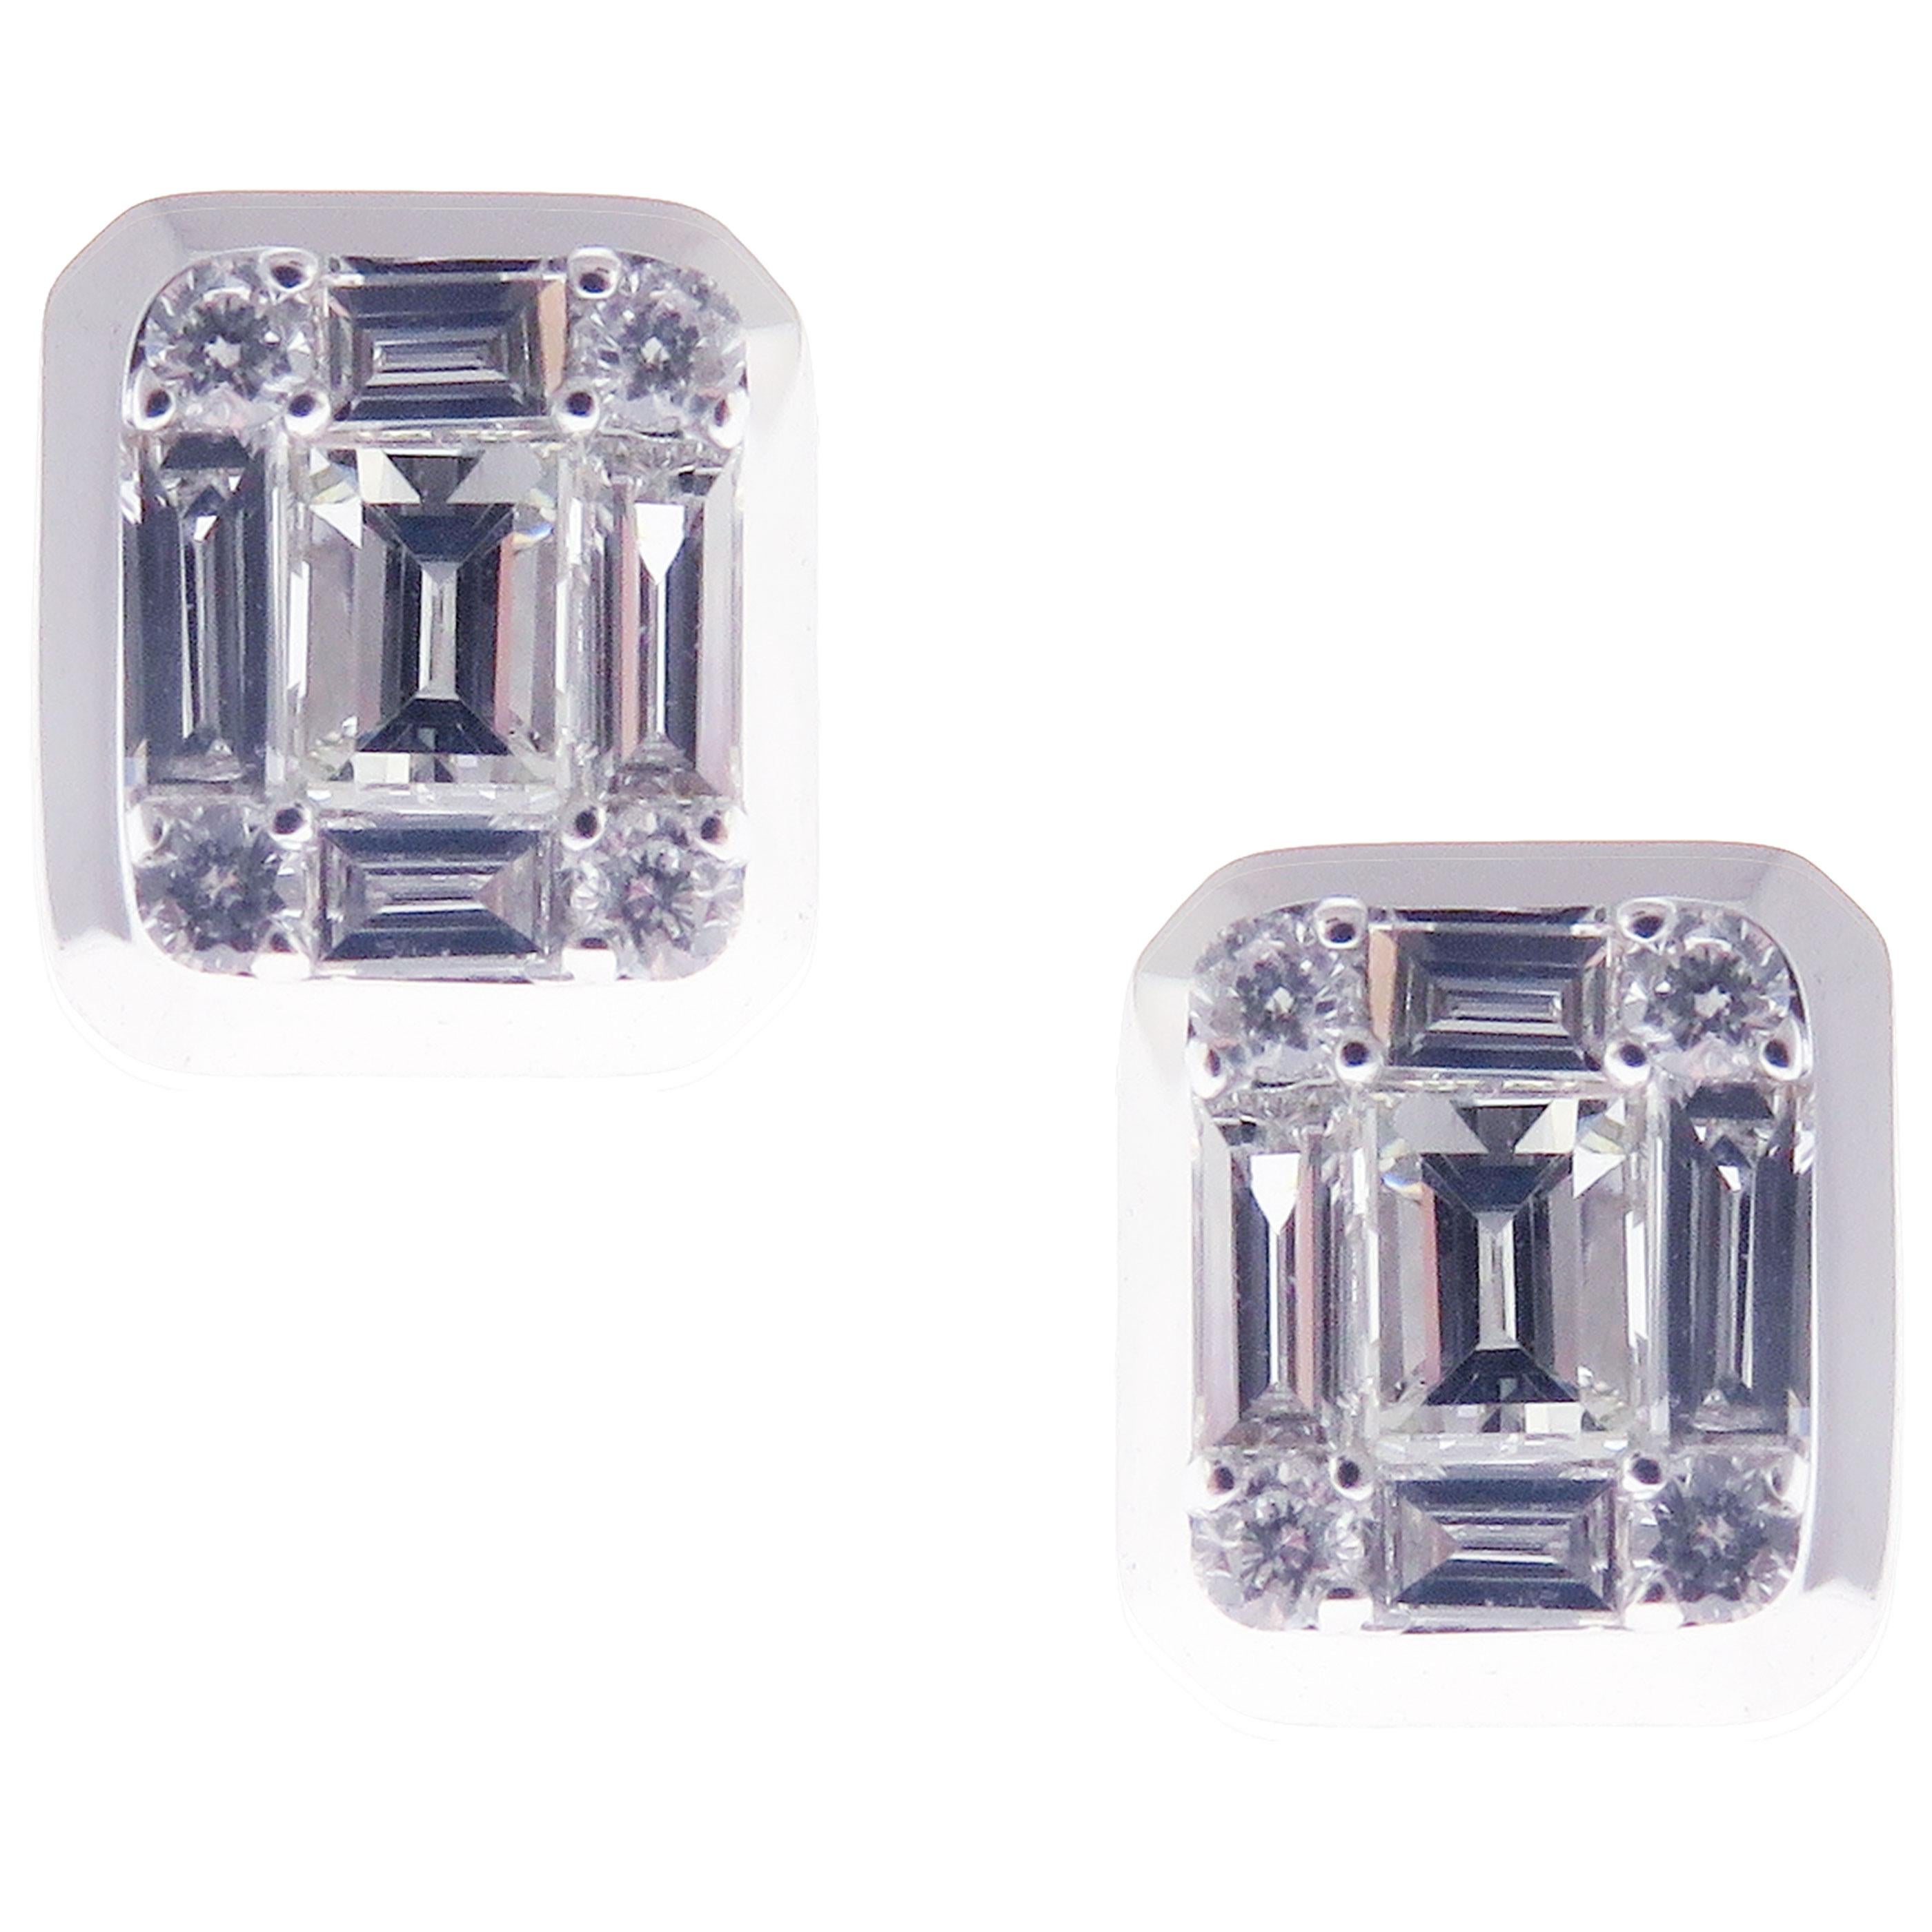 This round and baguette combination diamond illusion stud earring is crafted in 18-karat white gold, featuring 8 round white diamonds totaling of 0.06 carats and 10 baguette white diamonds totaling of 0.29 carats.
Approximate total weight 2.53